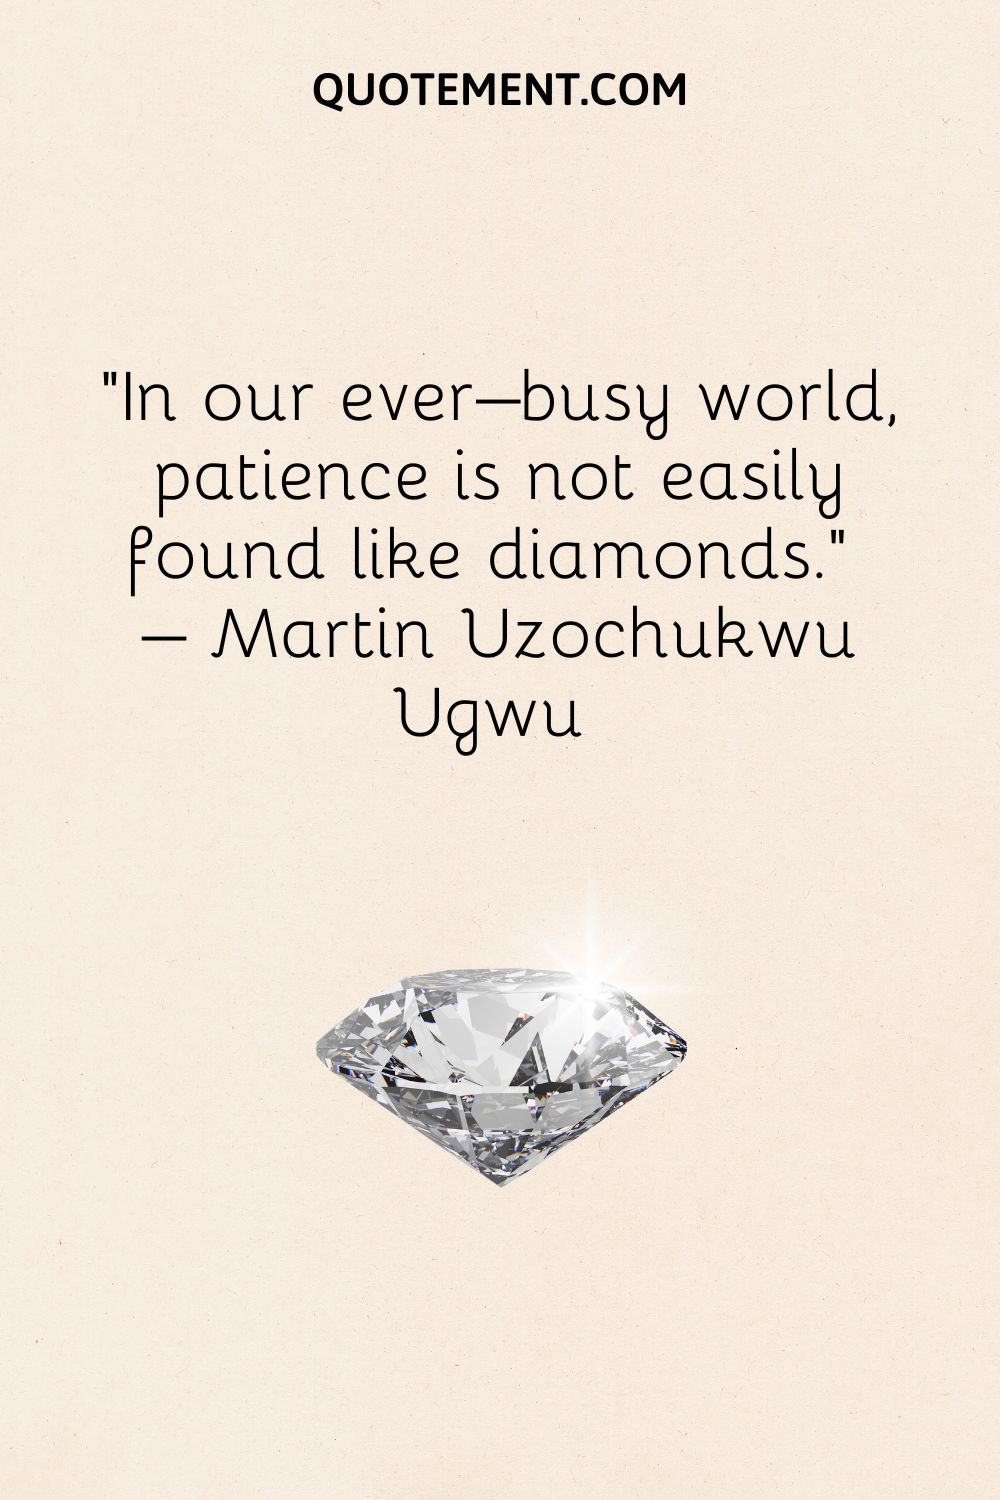 In our ever–busy world, patience is not easily found like diamonds